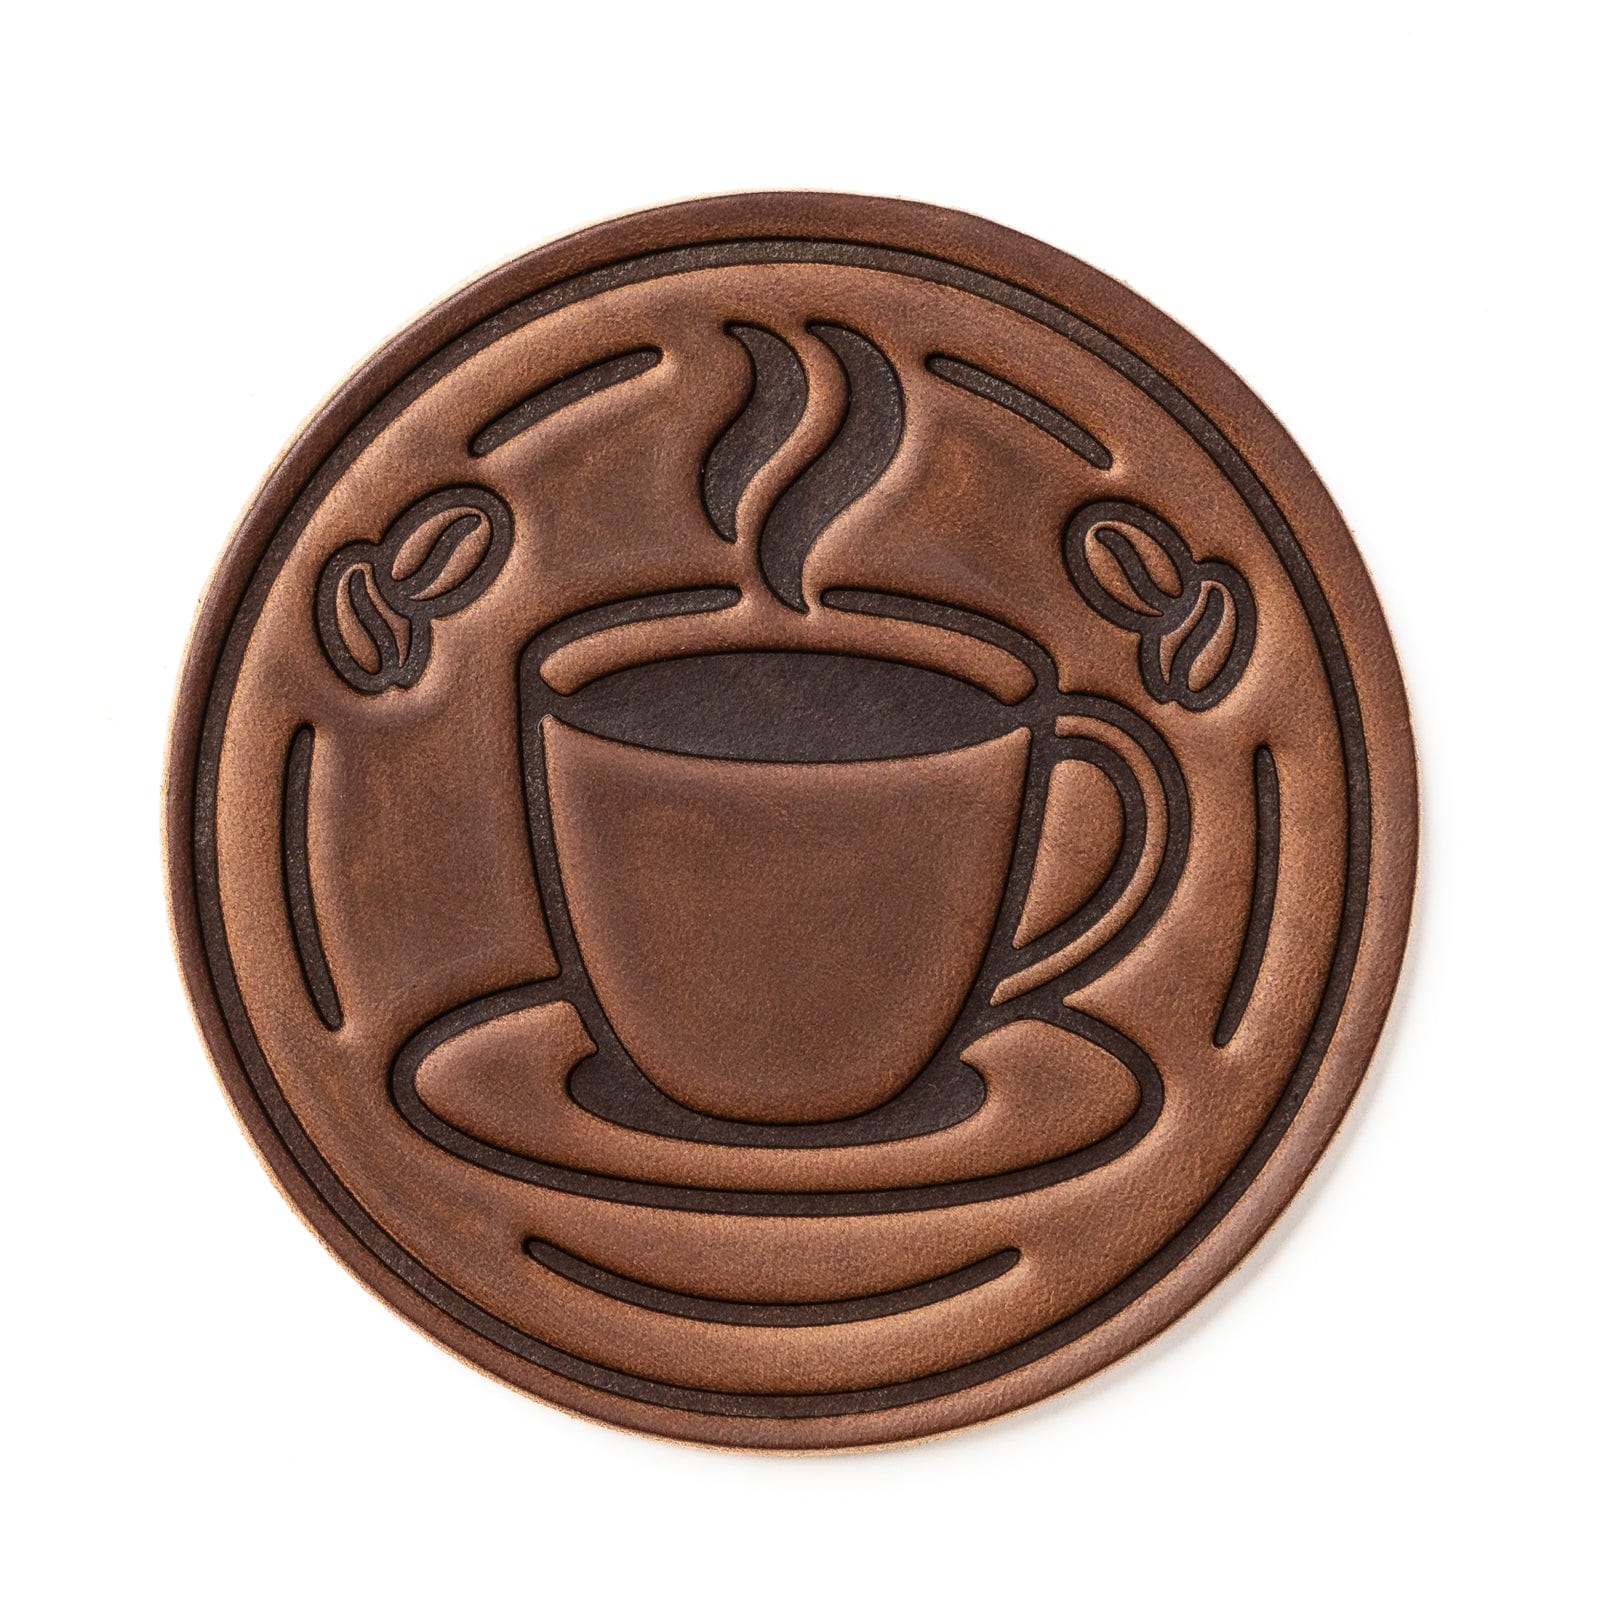 Coffee Coasters - Natural - 4 Pack Popov Leather